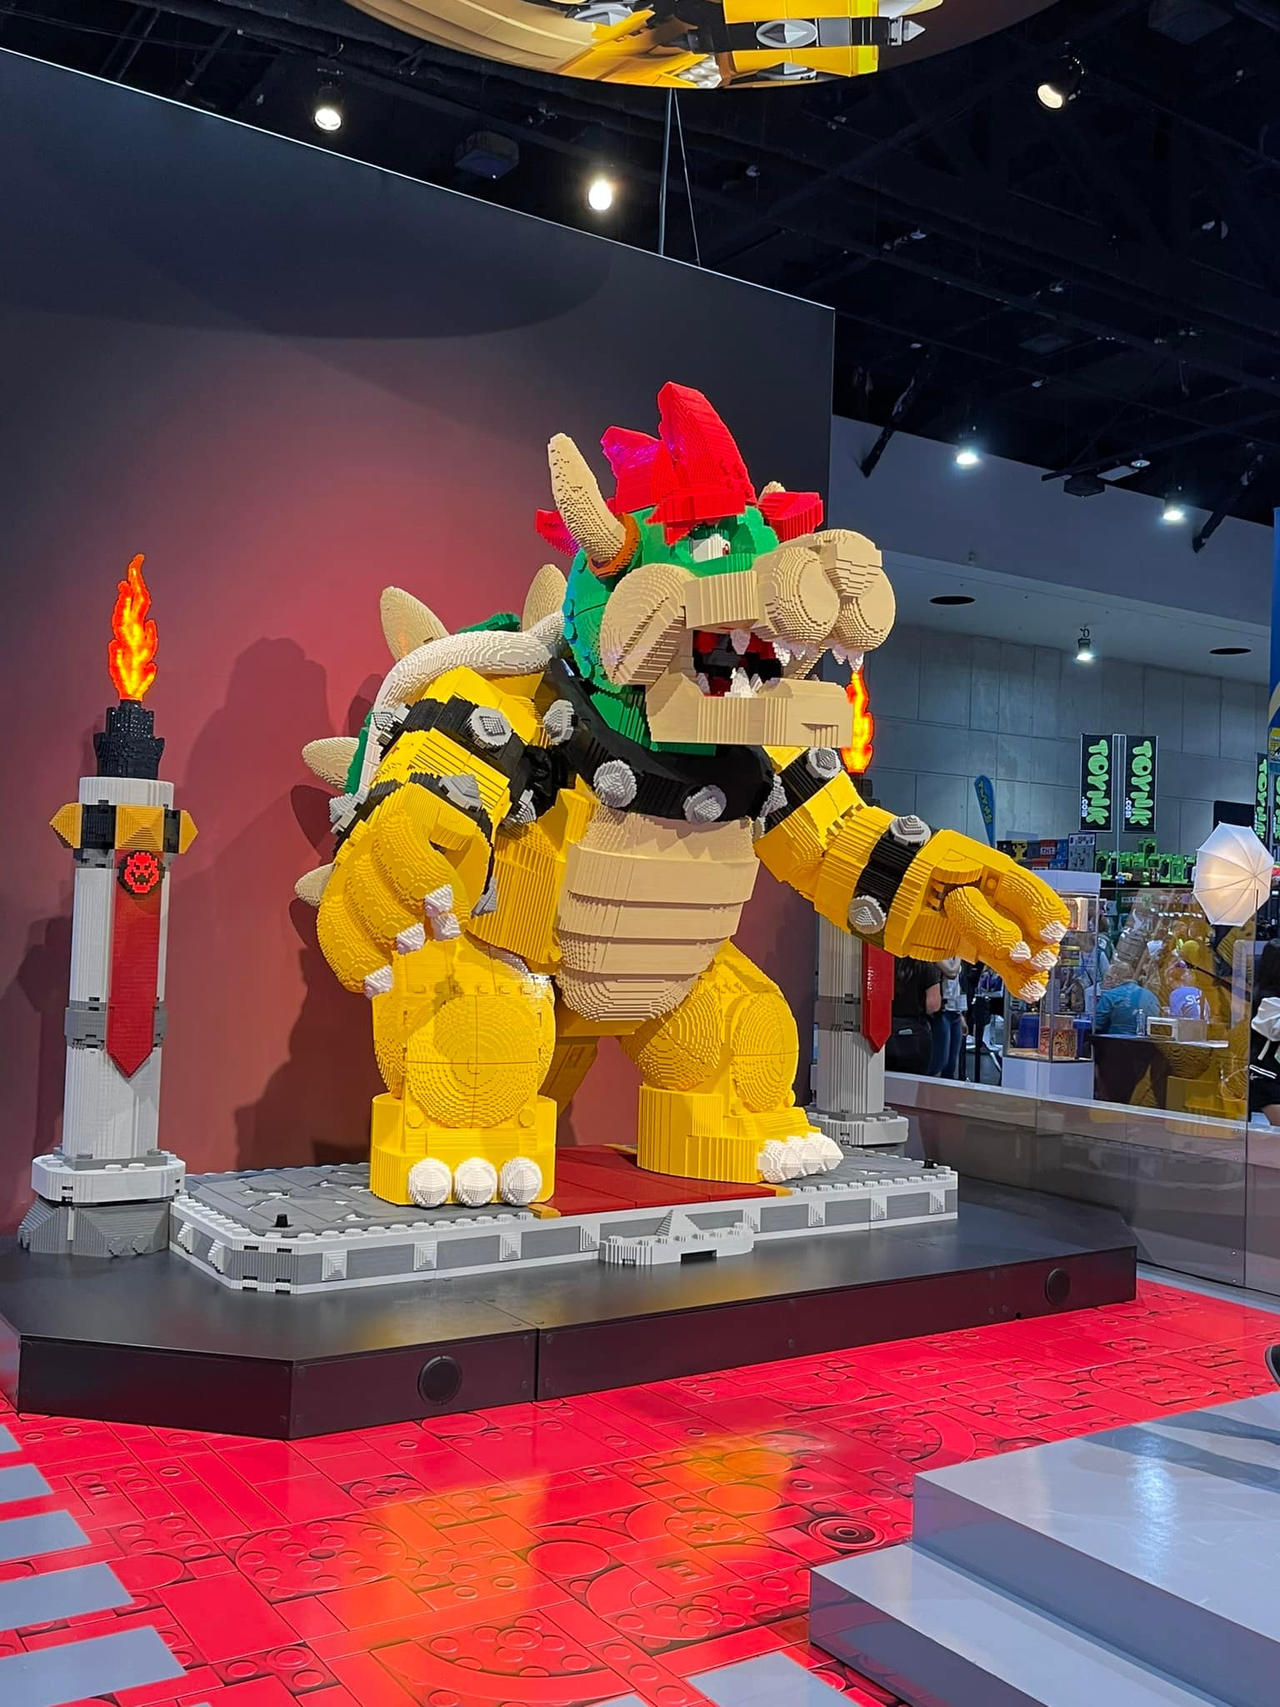 Giant LEGO Bowser at SDCC 2022 by IAmAutism on DeviantArt